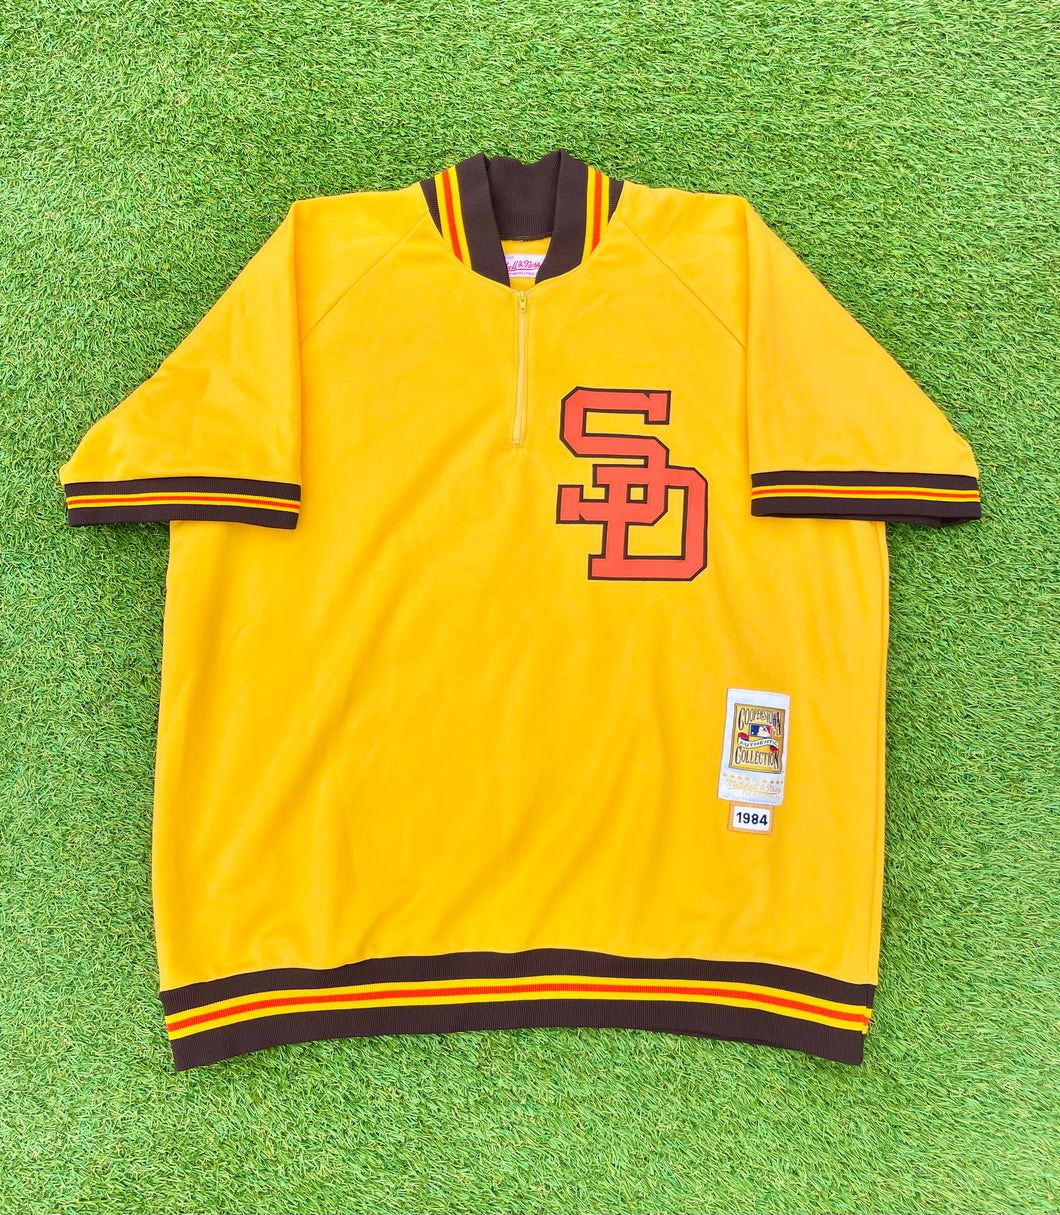 Tony Gwynn San Diego Padres Mitchell & Ness Cooperstown Authentic Jersey  size S